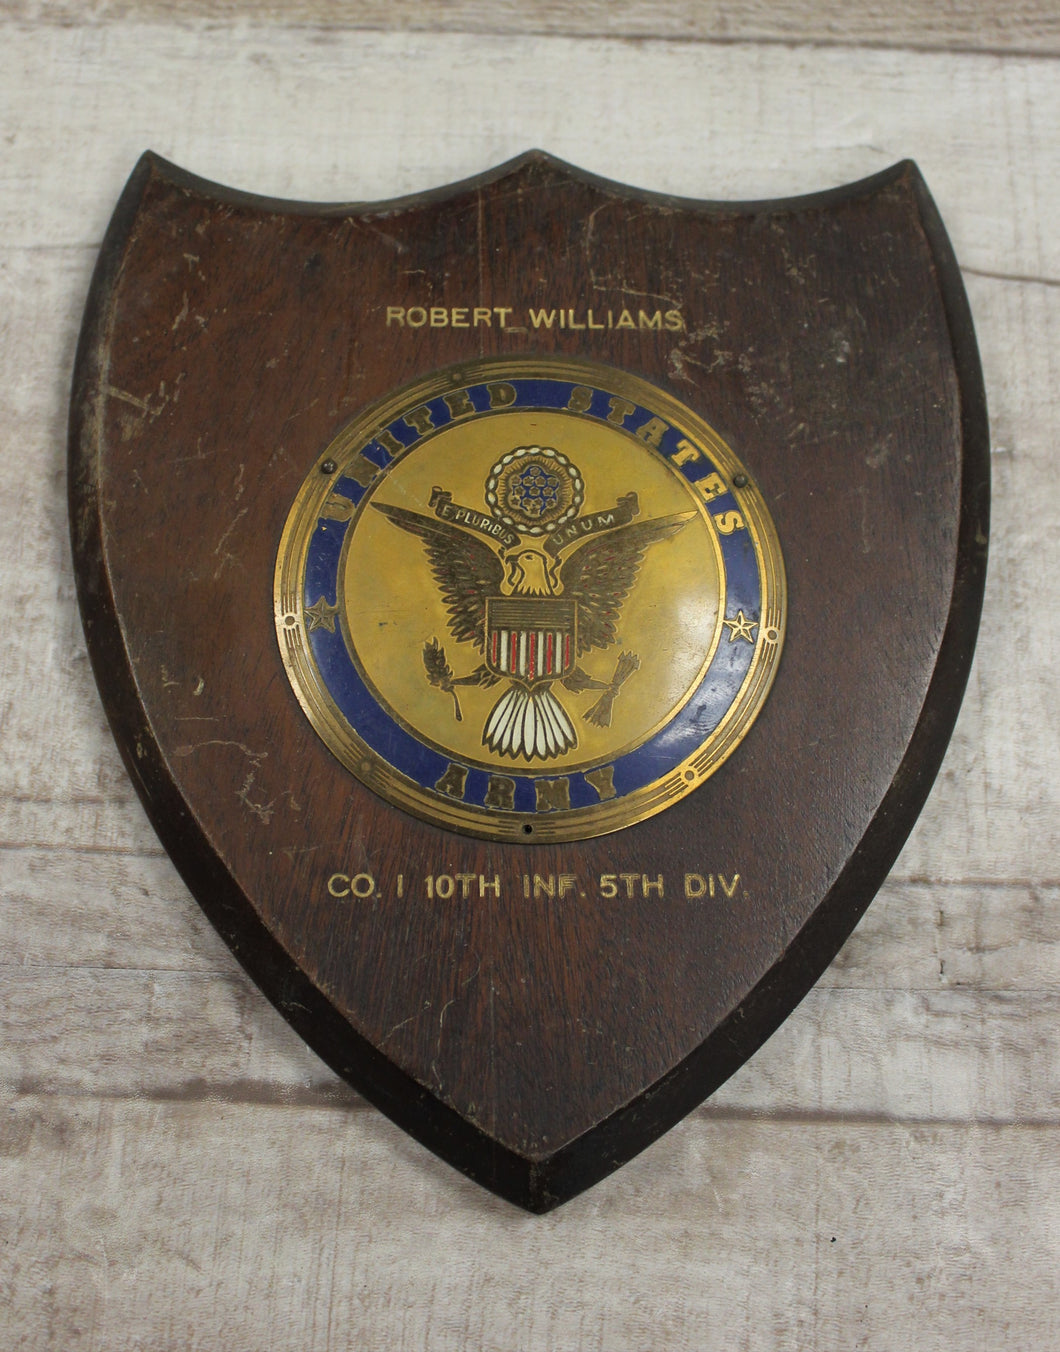 United States Army Robert Williams Award Plaque -Used